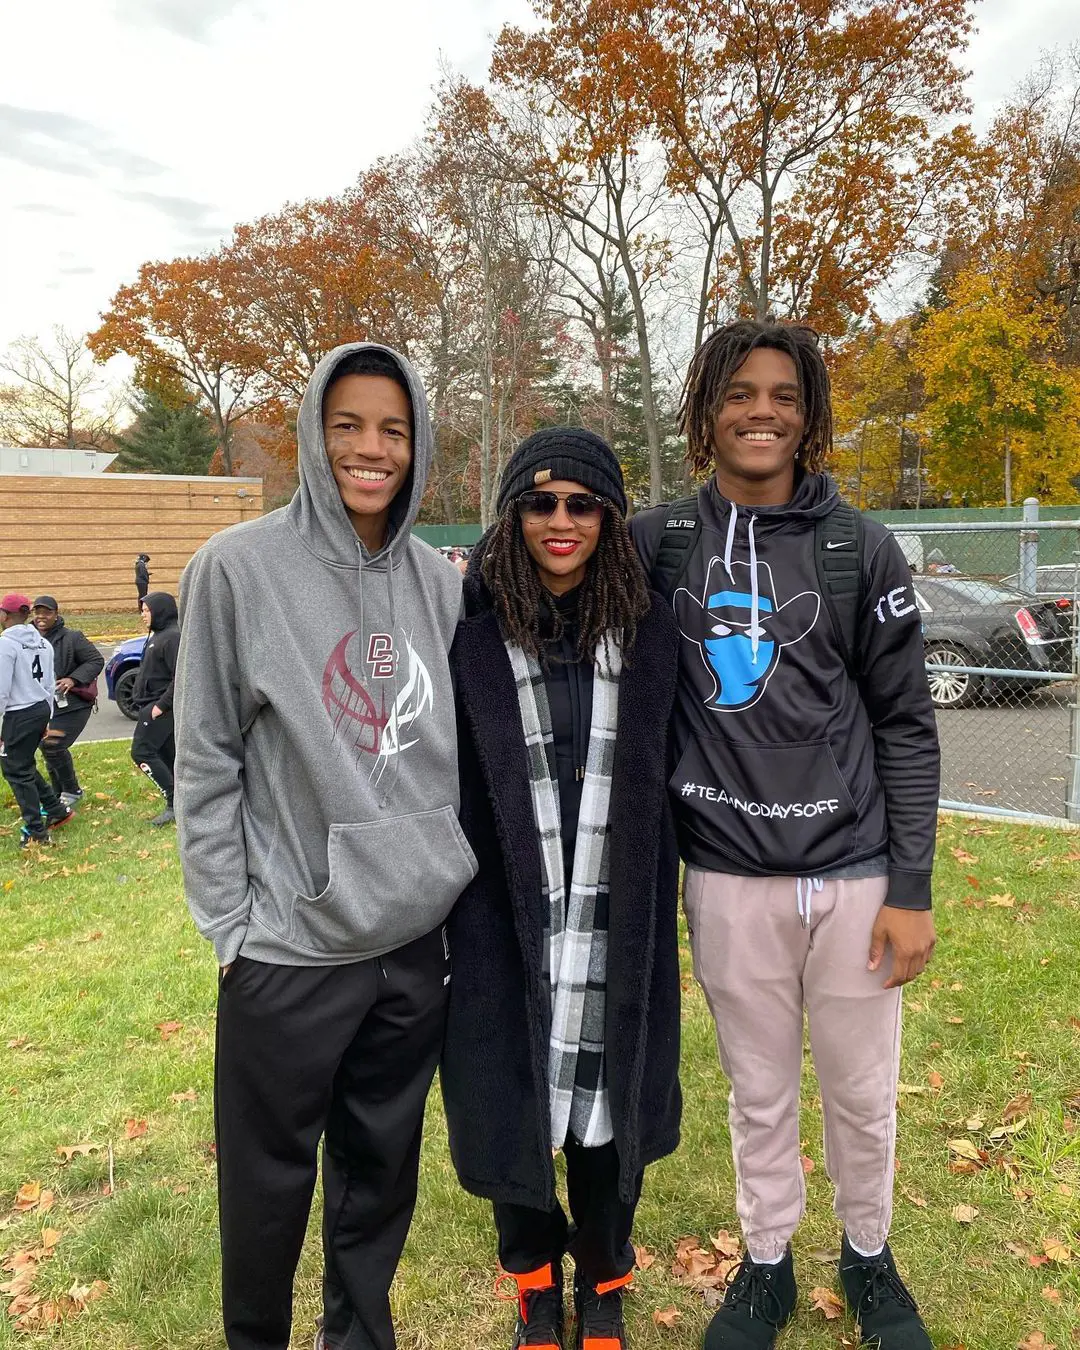 Atoya and her two sons, Nate Jr. and Nehemiah during the Thanksgiving weekend in 2021.